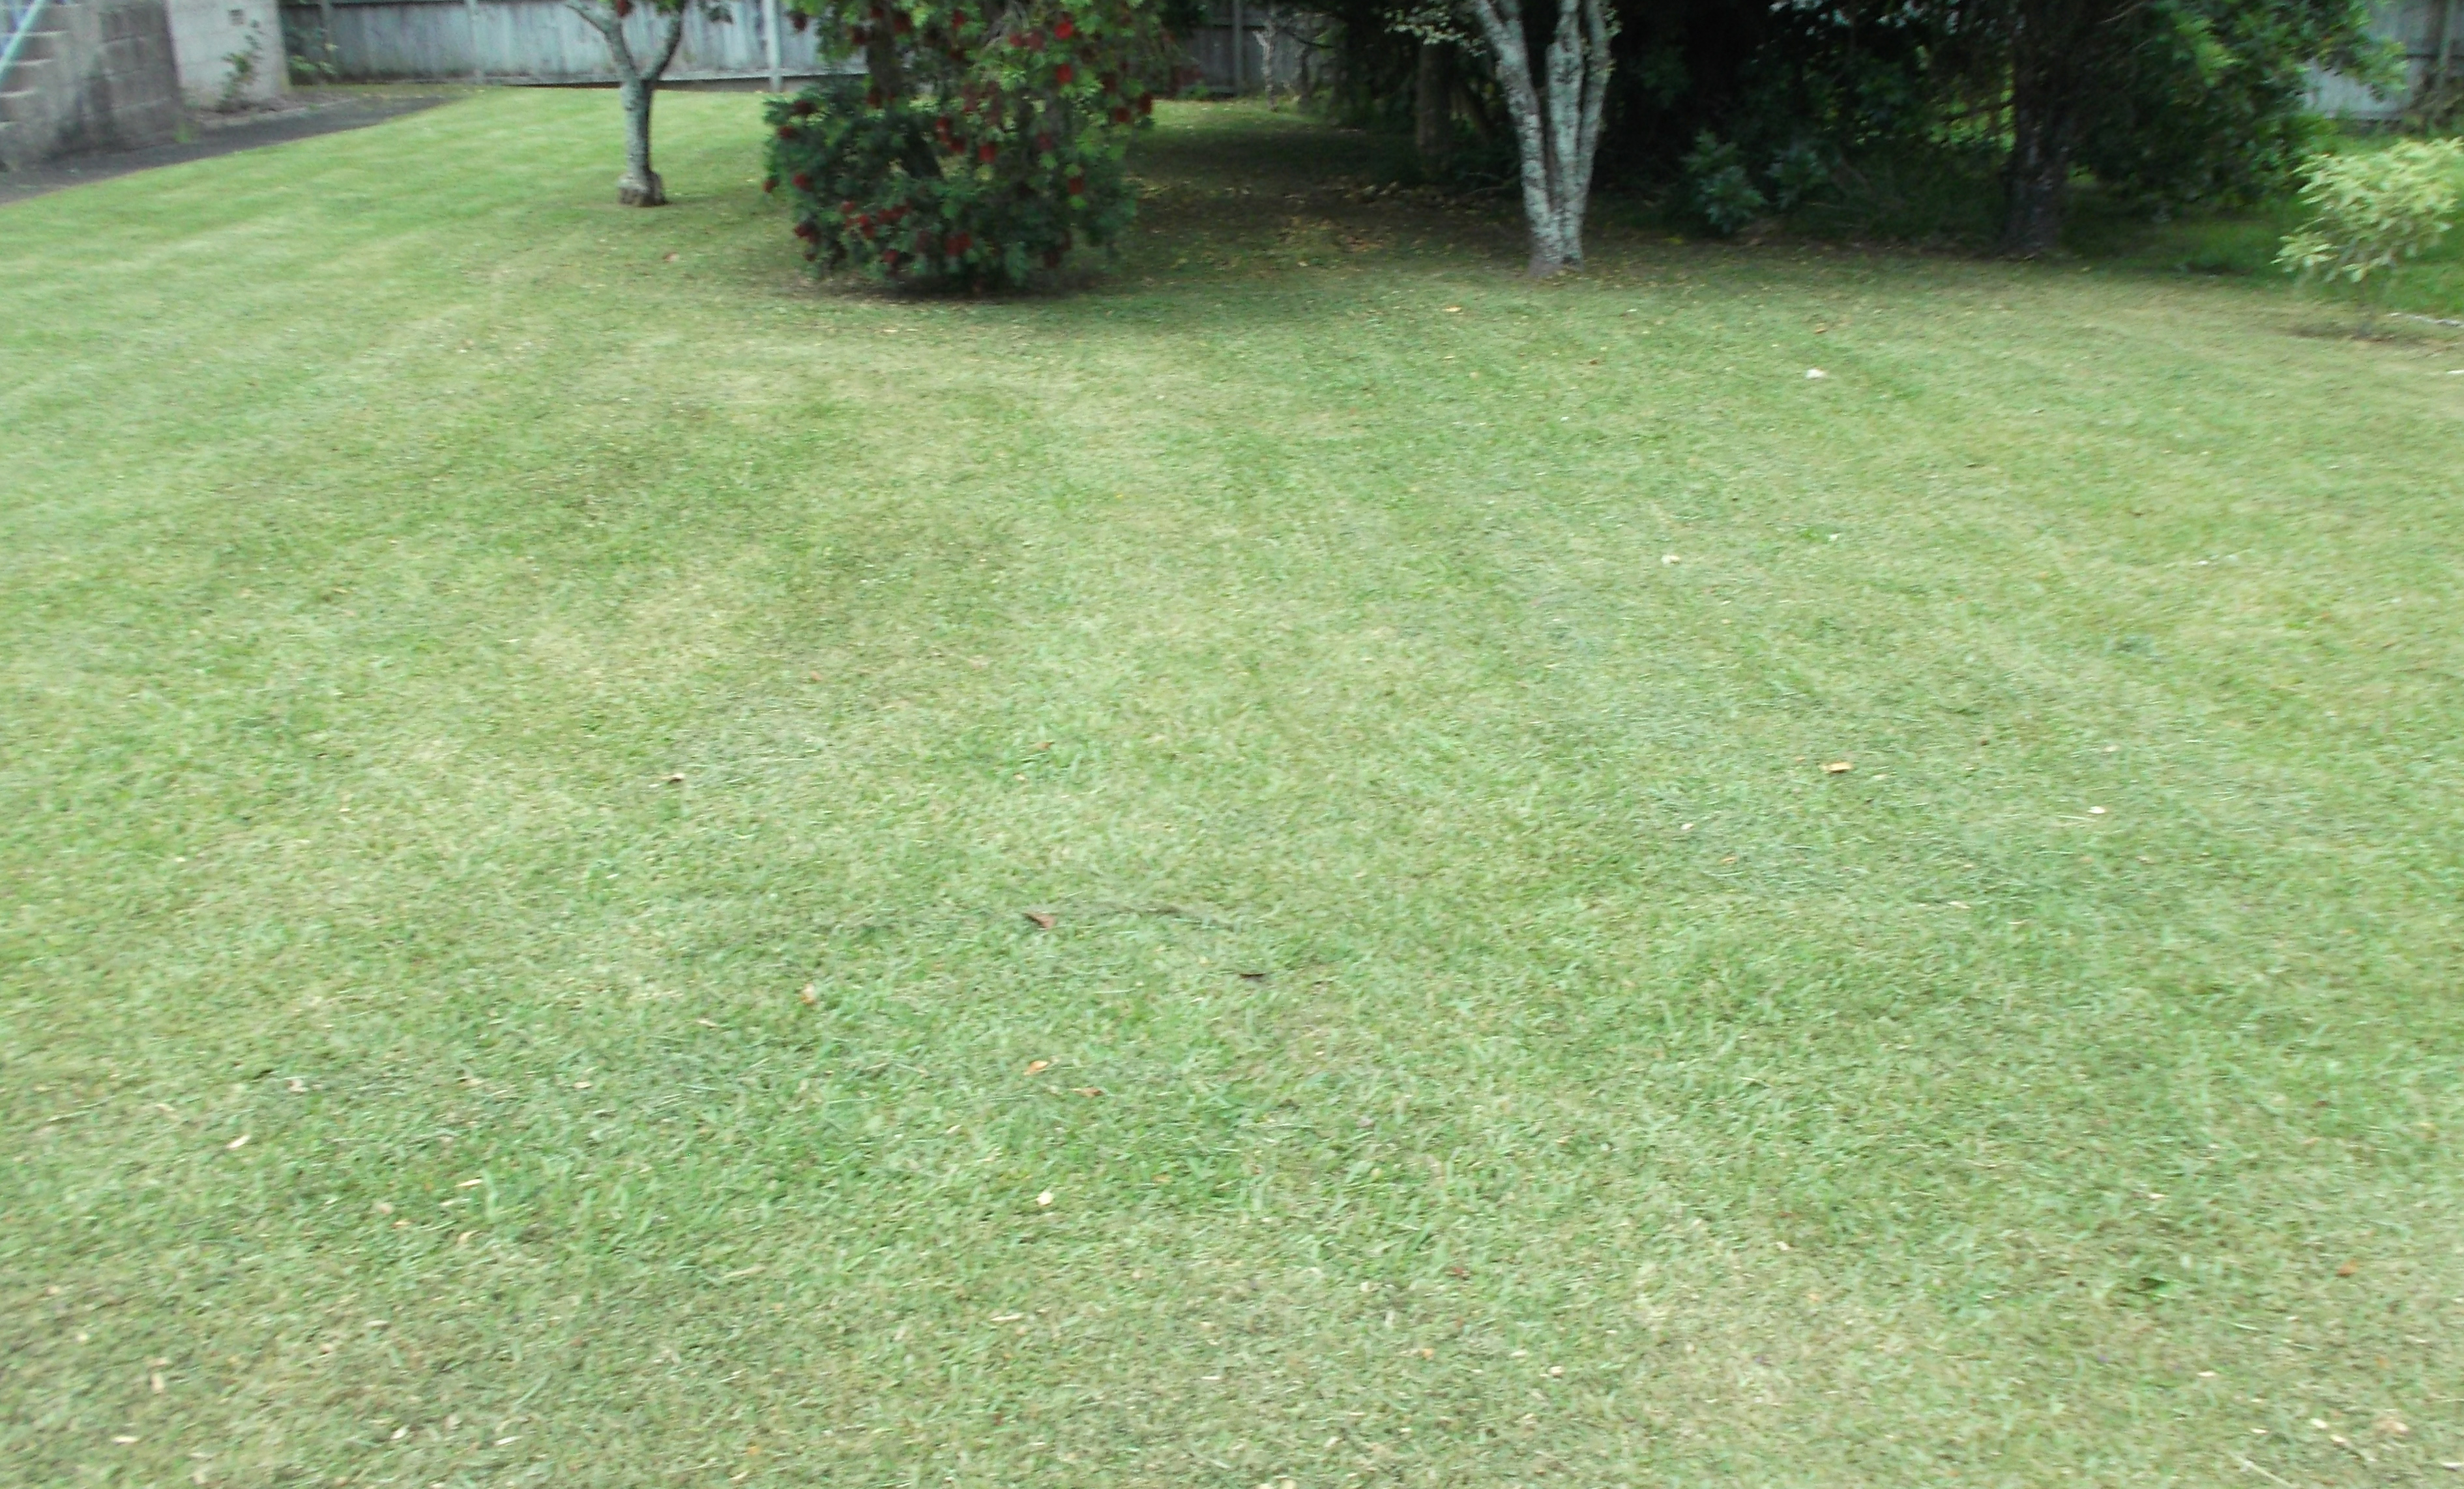 Lawn Mowing North Shore Jd Property Services